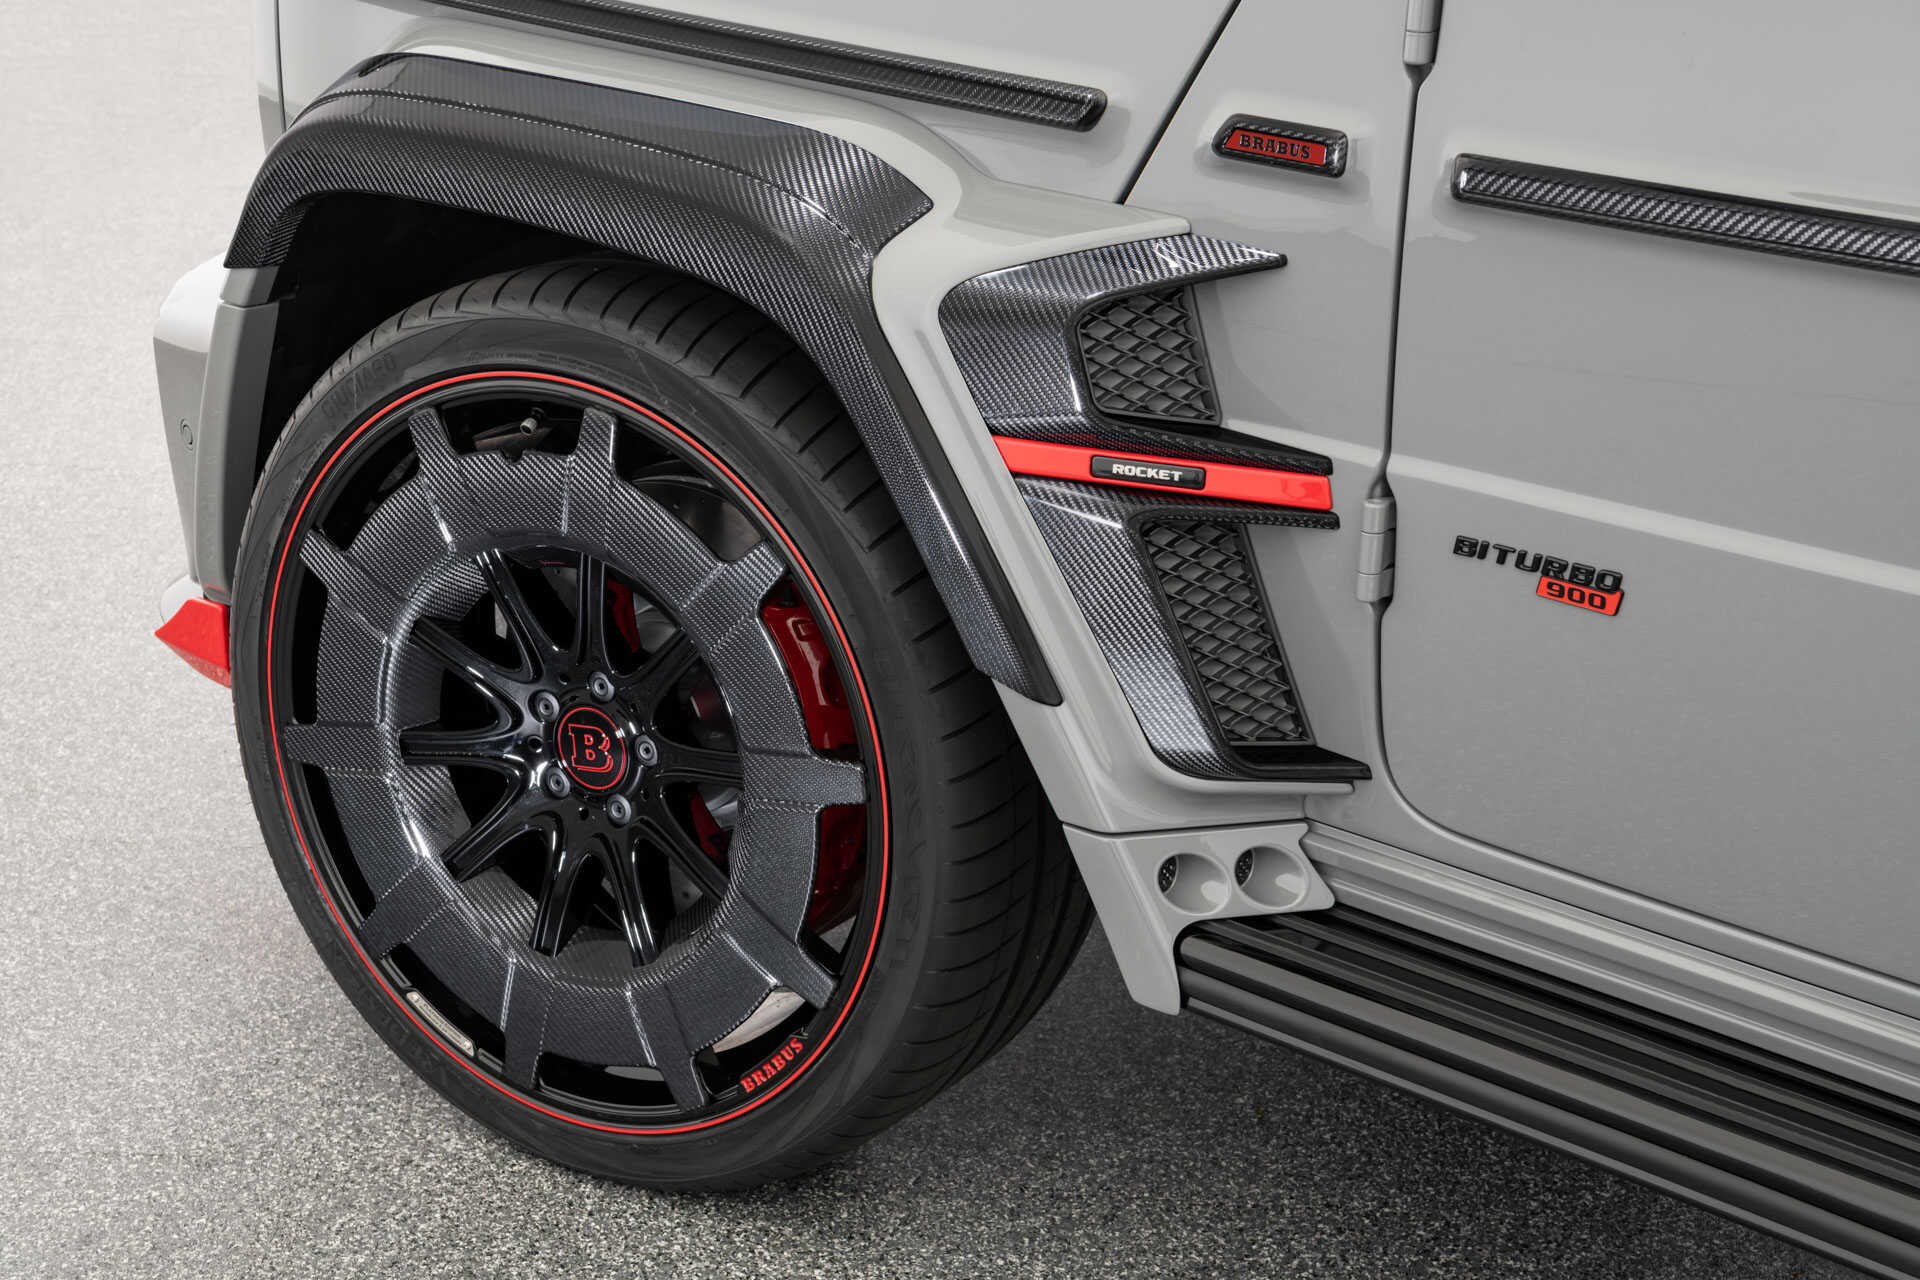 Check price and buy Brabus Rocket body kit for G-class